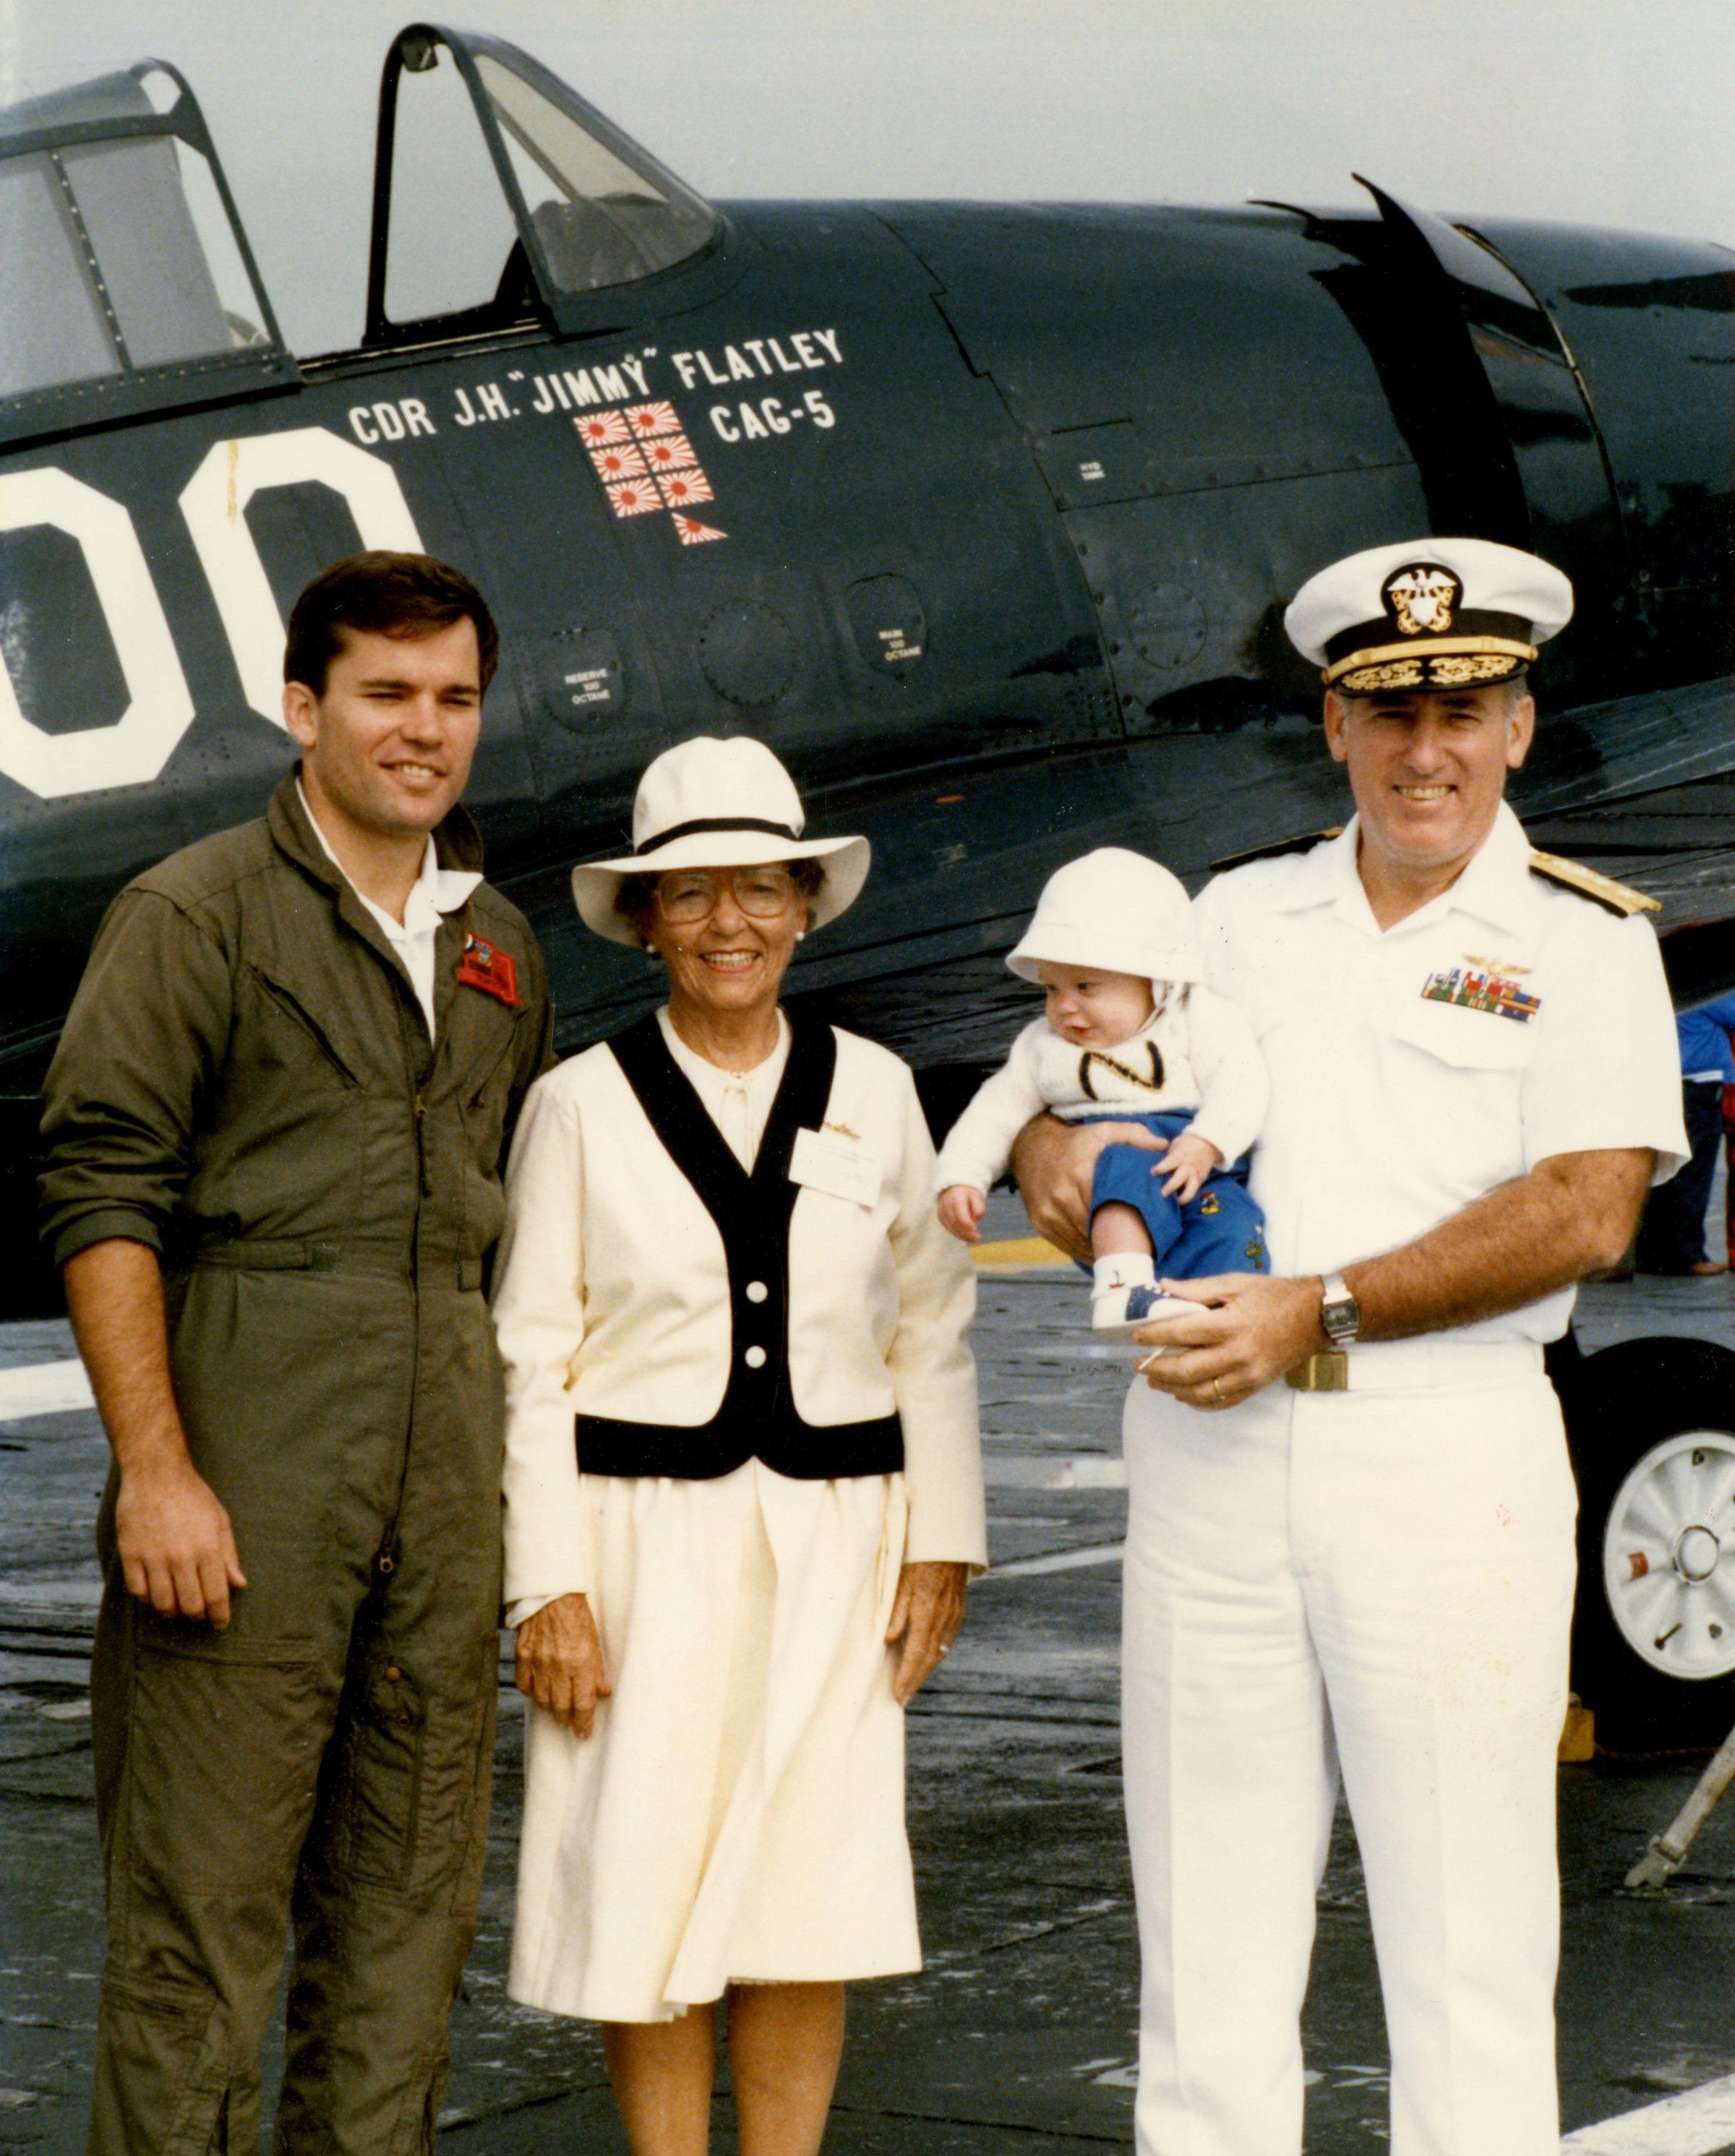 Primary Image of The Flatley Family Poses with the Hellcat Christened for James H. Flatley, Jr.